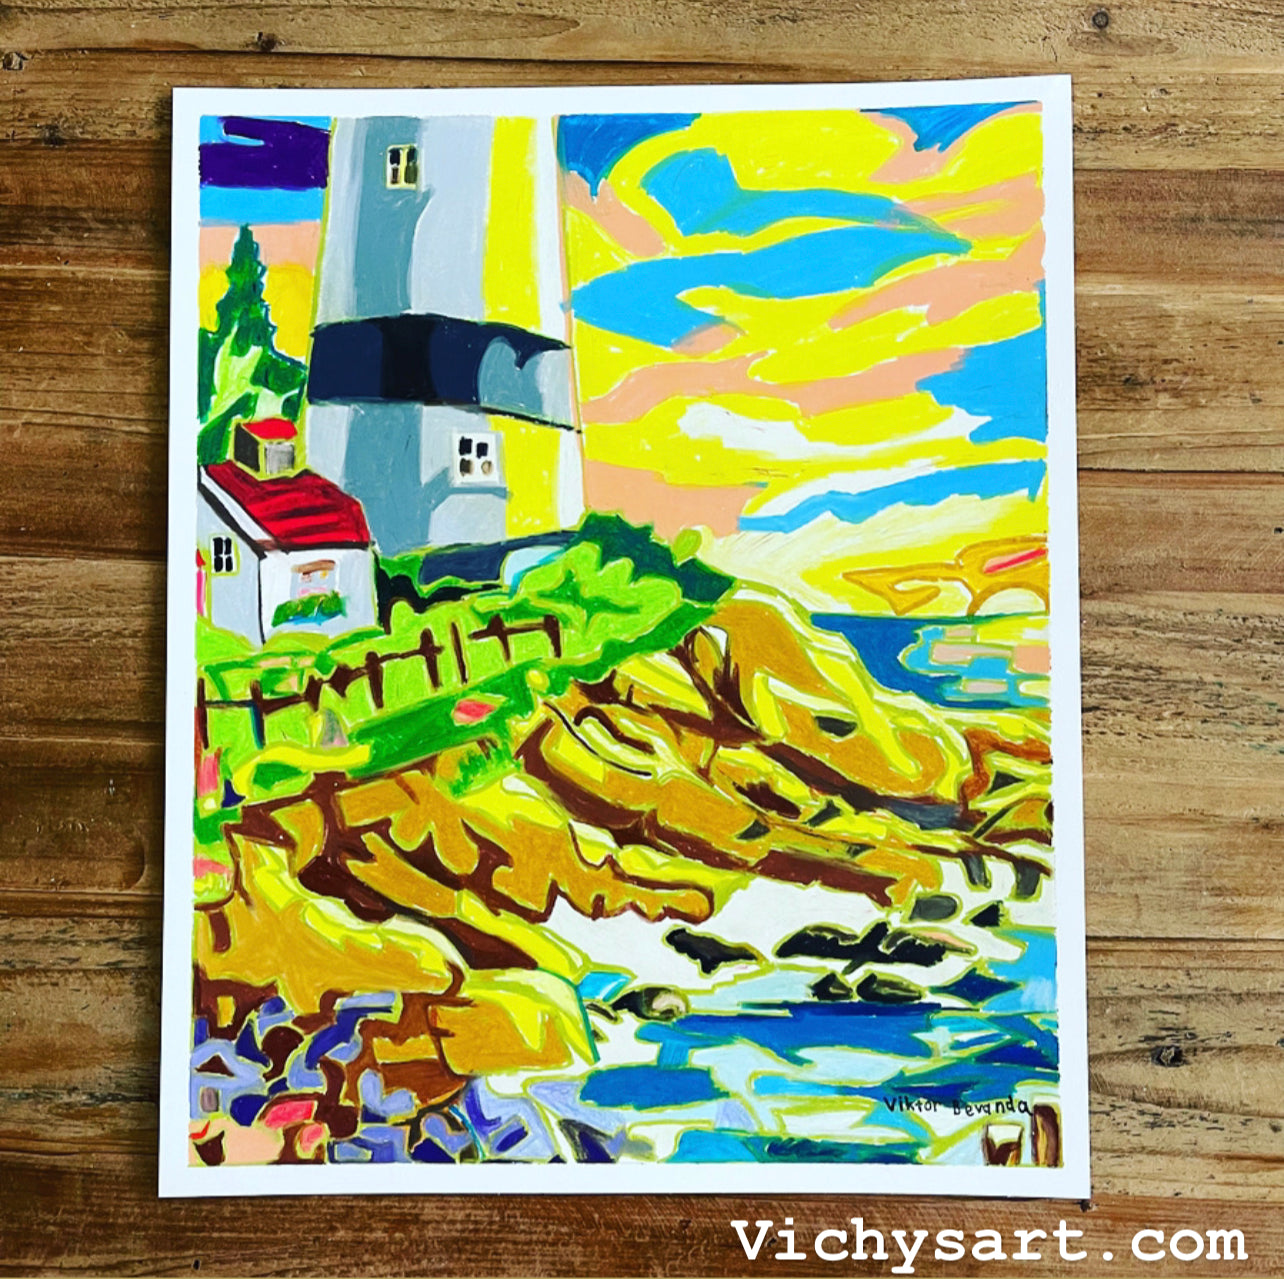 LIGHTHOUSES - Set of 6 art prints in size 5x7" or 8x10"